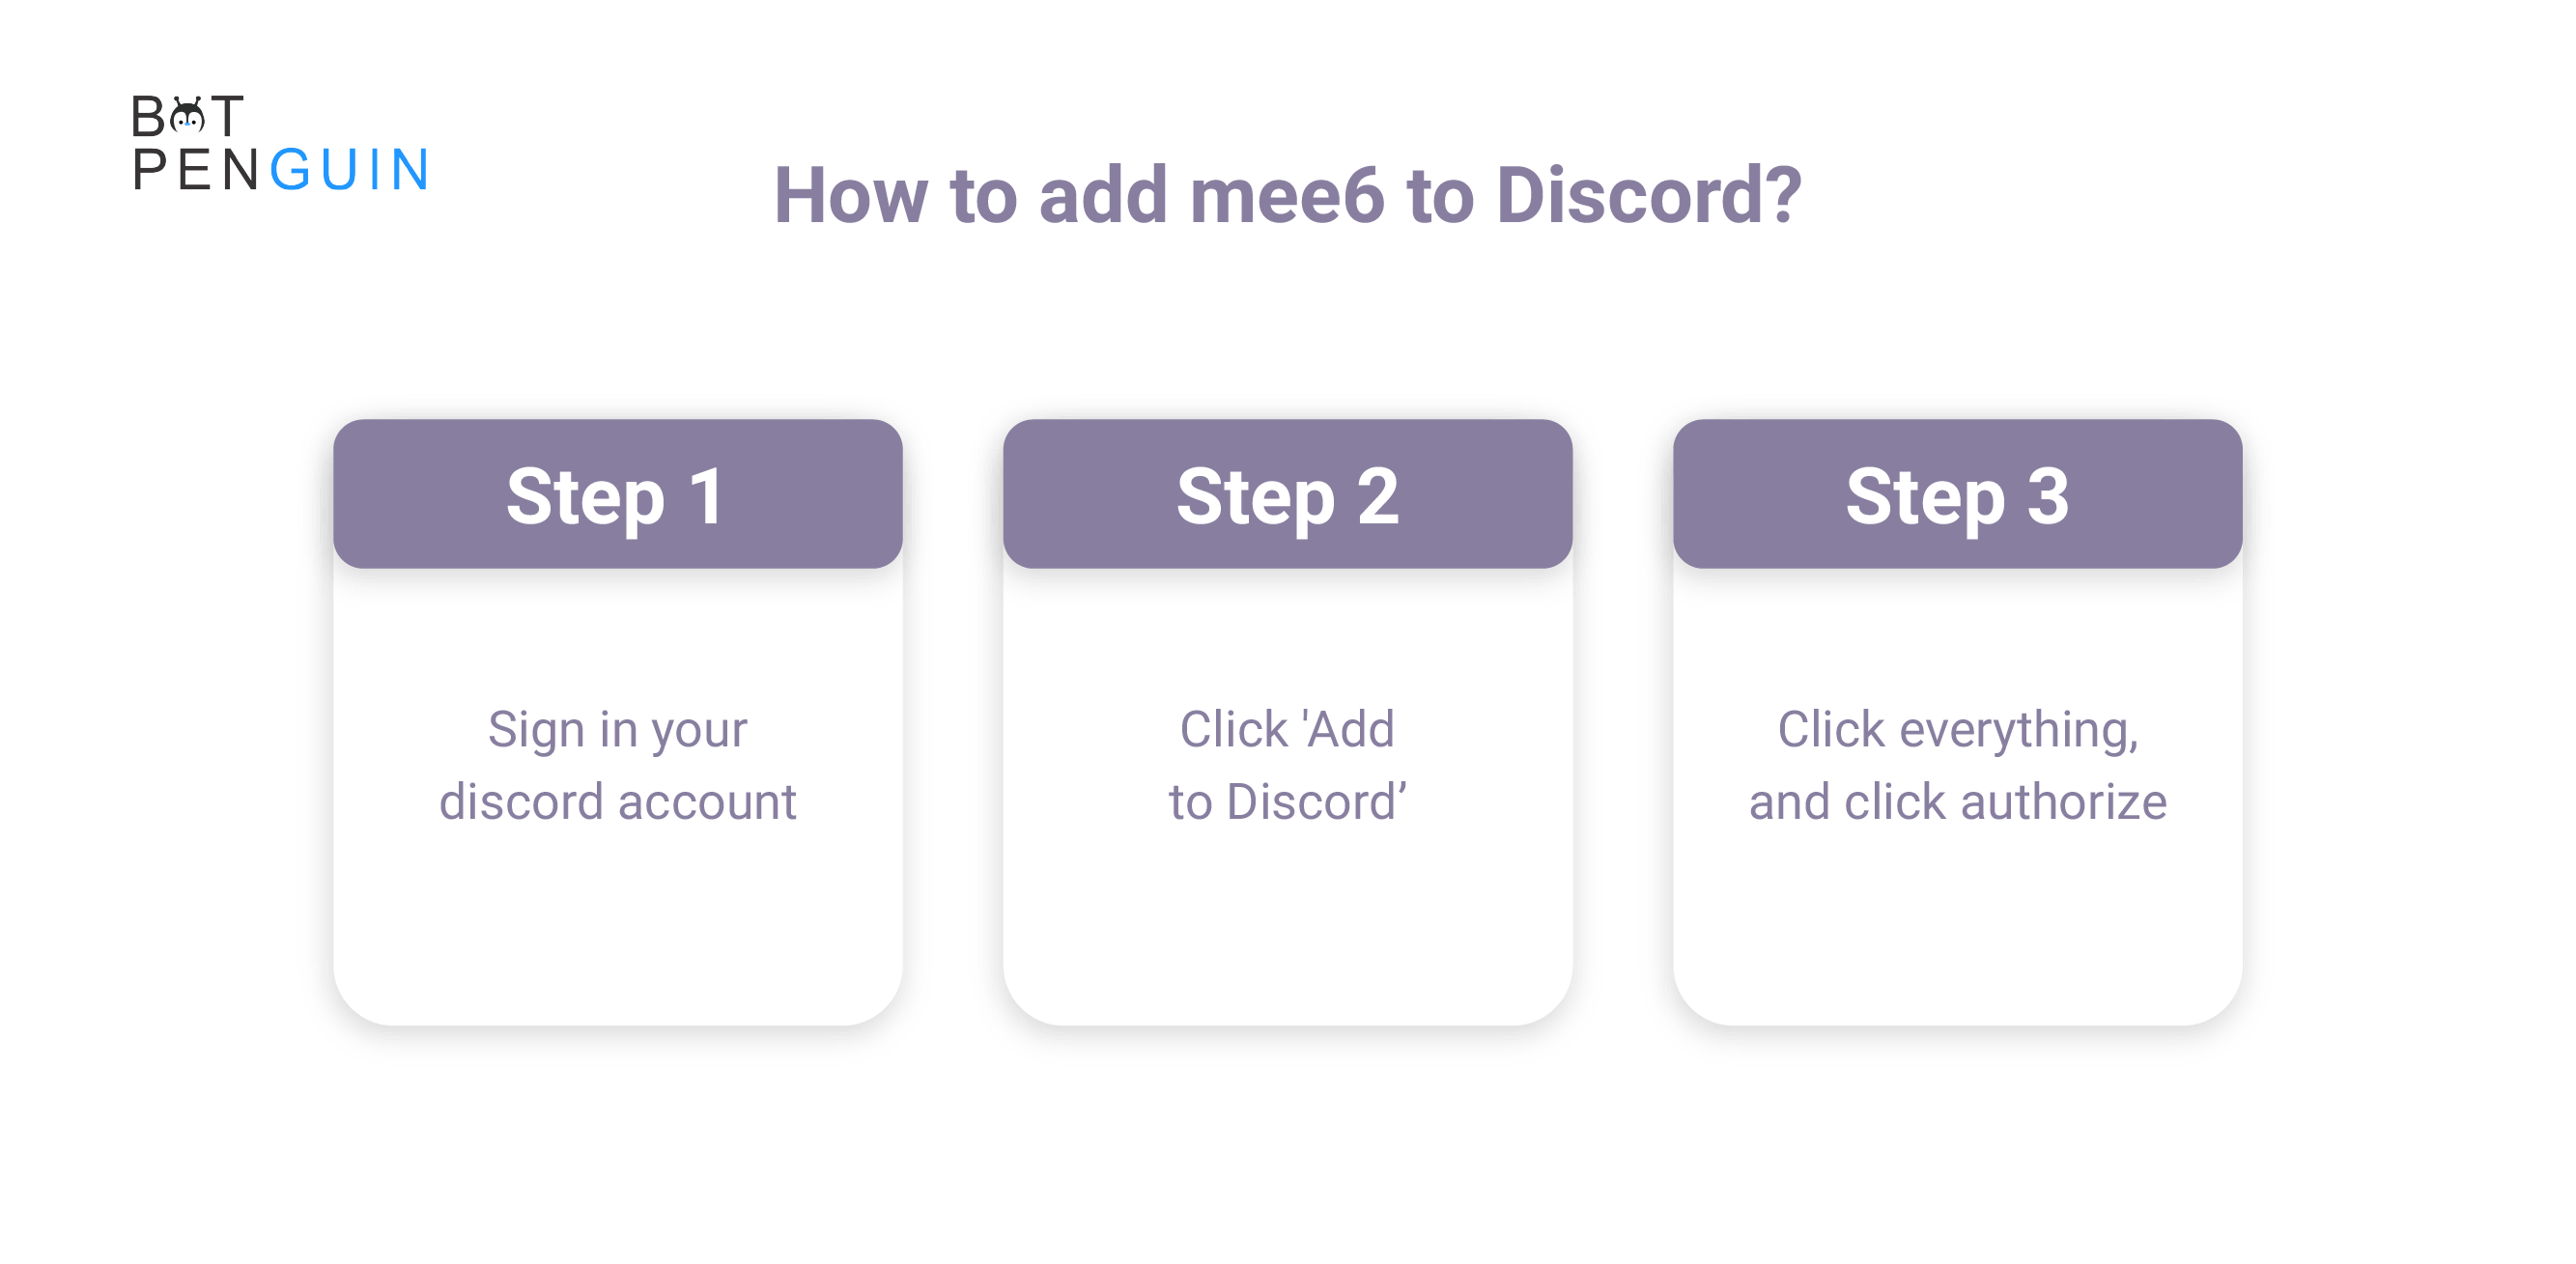 How to add mee6 to Discord?